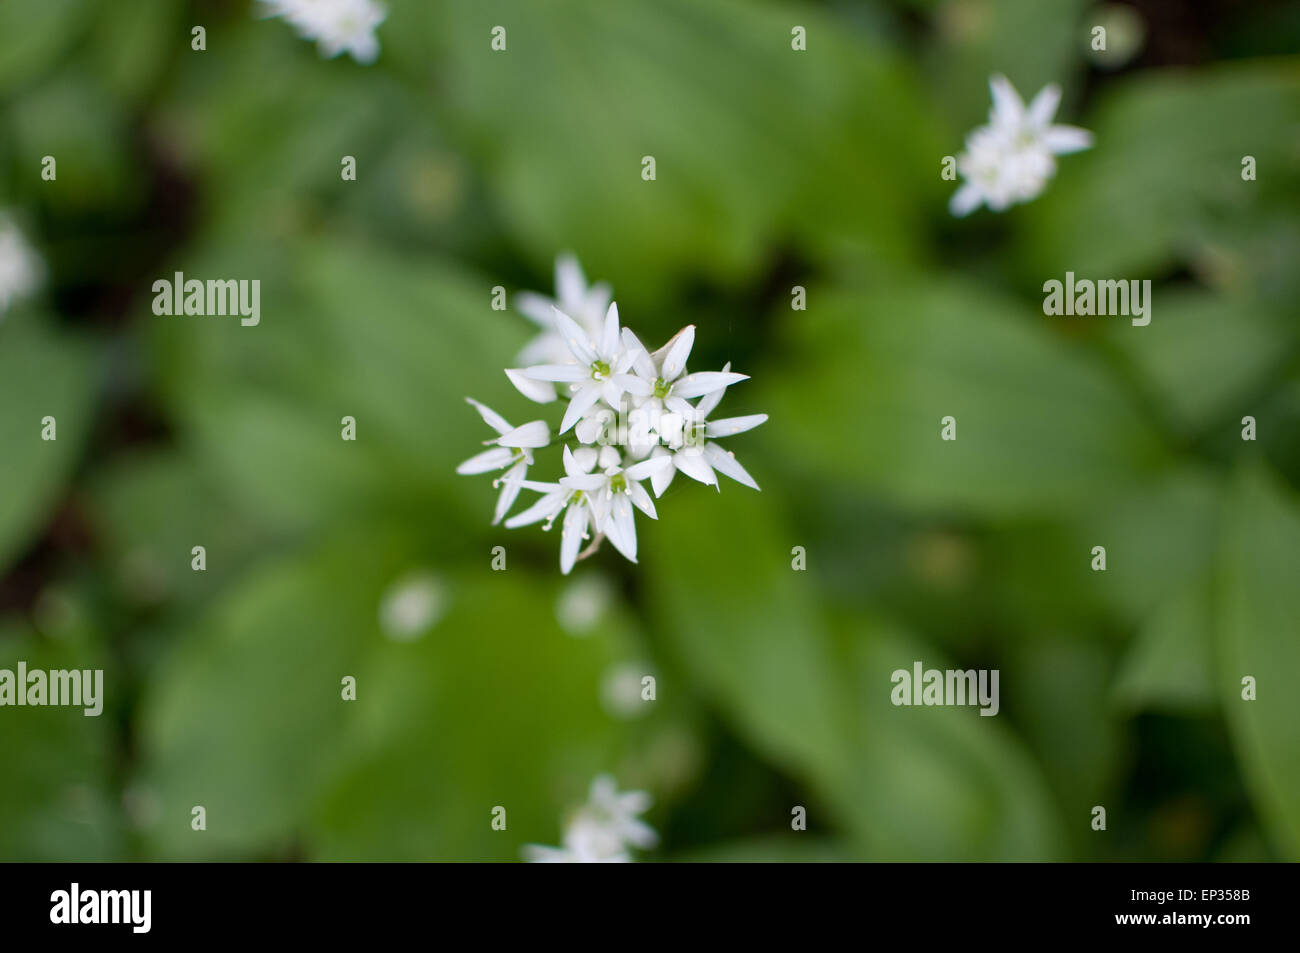 Chalford, Gloucestershire, UK. 13th May, 2015. Wild Garlic blossom in woods in Chalford Gloucestershire. The long lush leaves are edible and taste faintly of garlic. They can be used in cooking like chives. They always blossom at the end of Spring. Credit:  Tricia de Courcy Ling/Alamy Live News Stock Photo